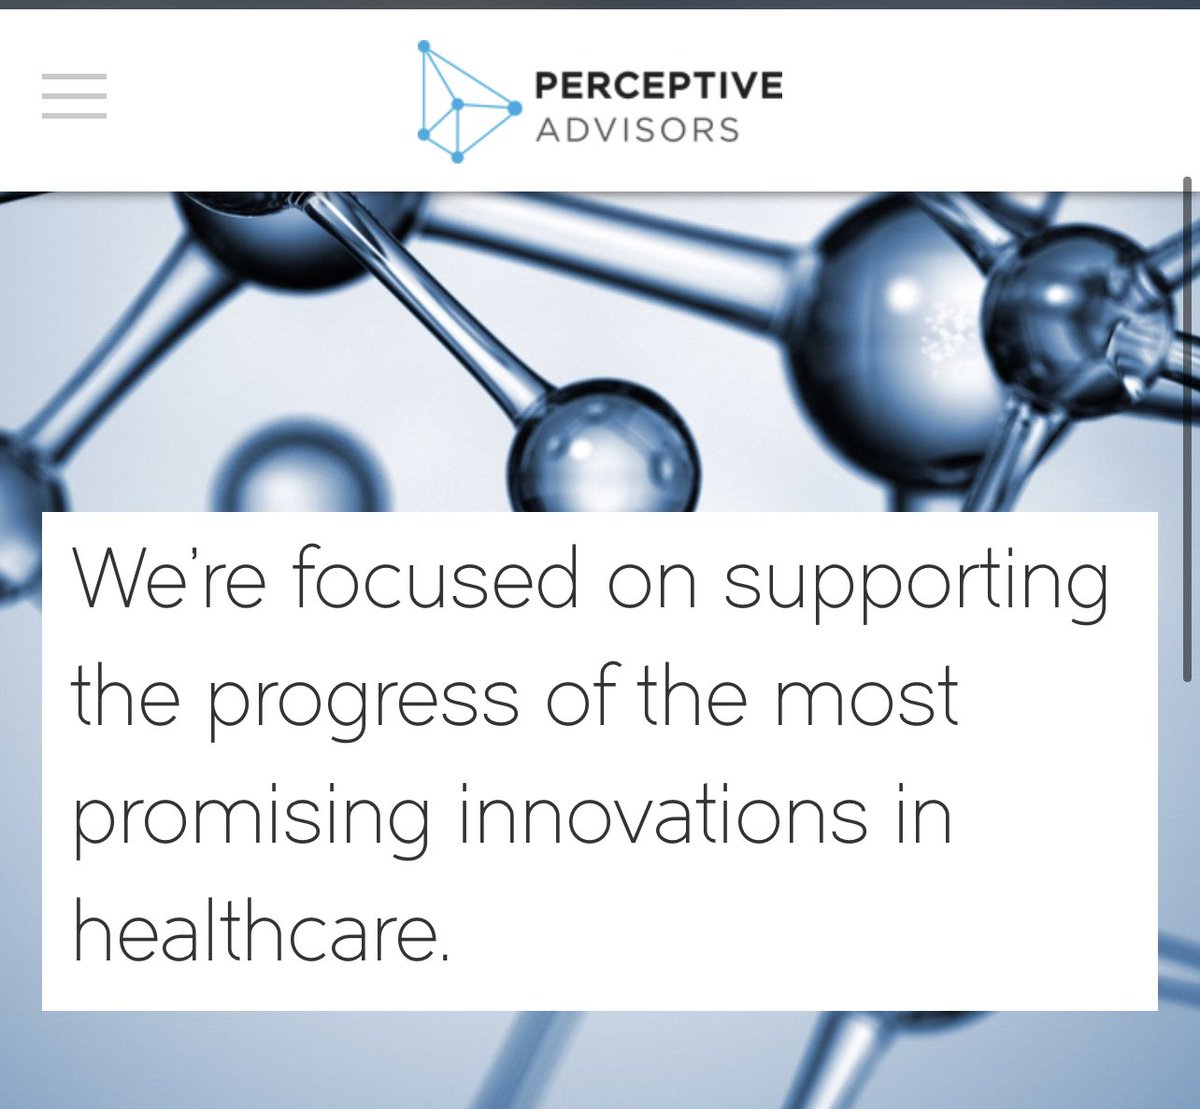  $BLSA 13G #1:10/28/2020Perceptive Advisors bought 1 mil shares (7.0%).They are another big life sciences investing firm.- over 18 years of investments- invest throughout a company’s lifecycle- focus on medical devices, diagnostics, digital health, biotech and pharmas.